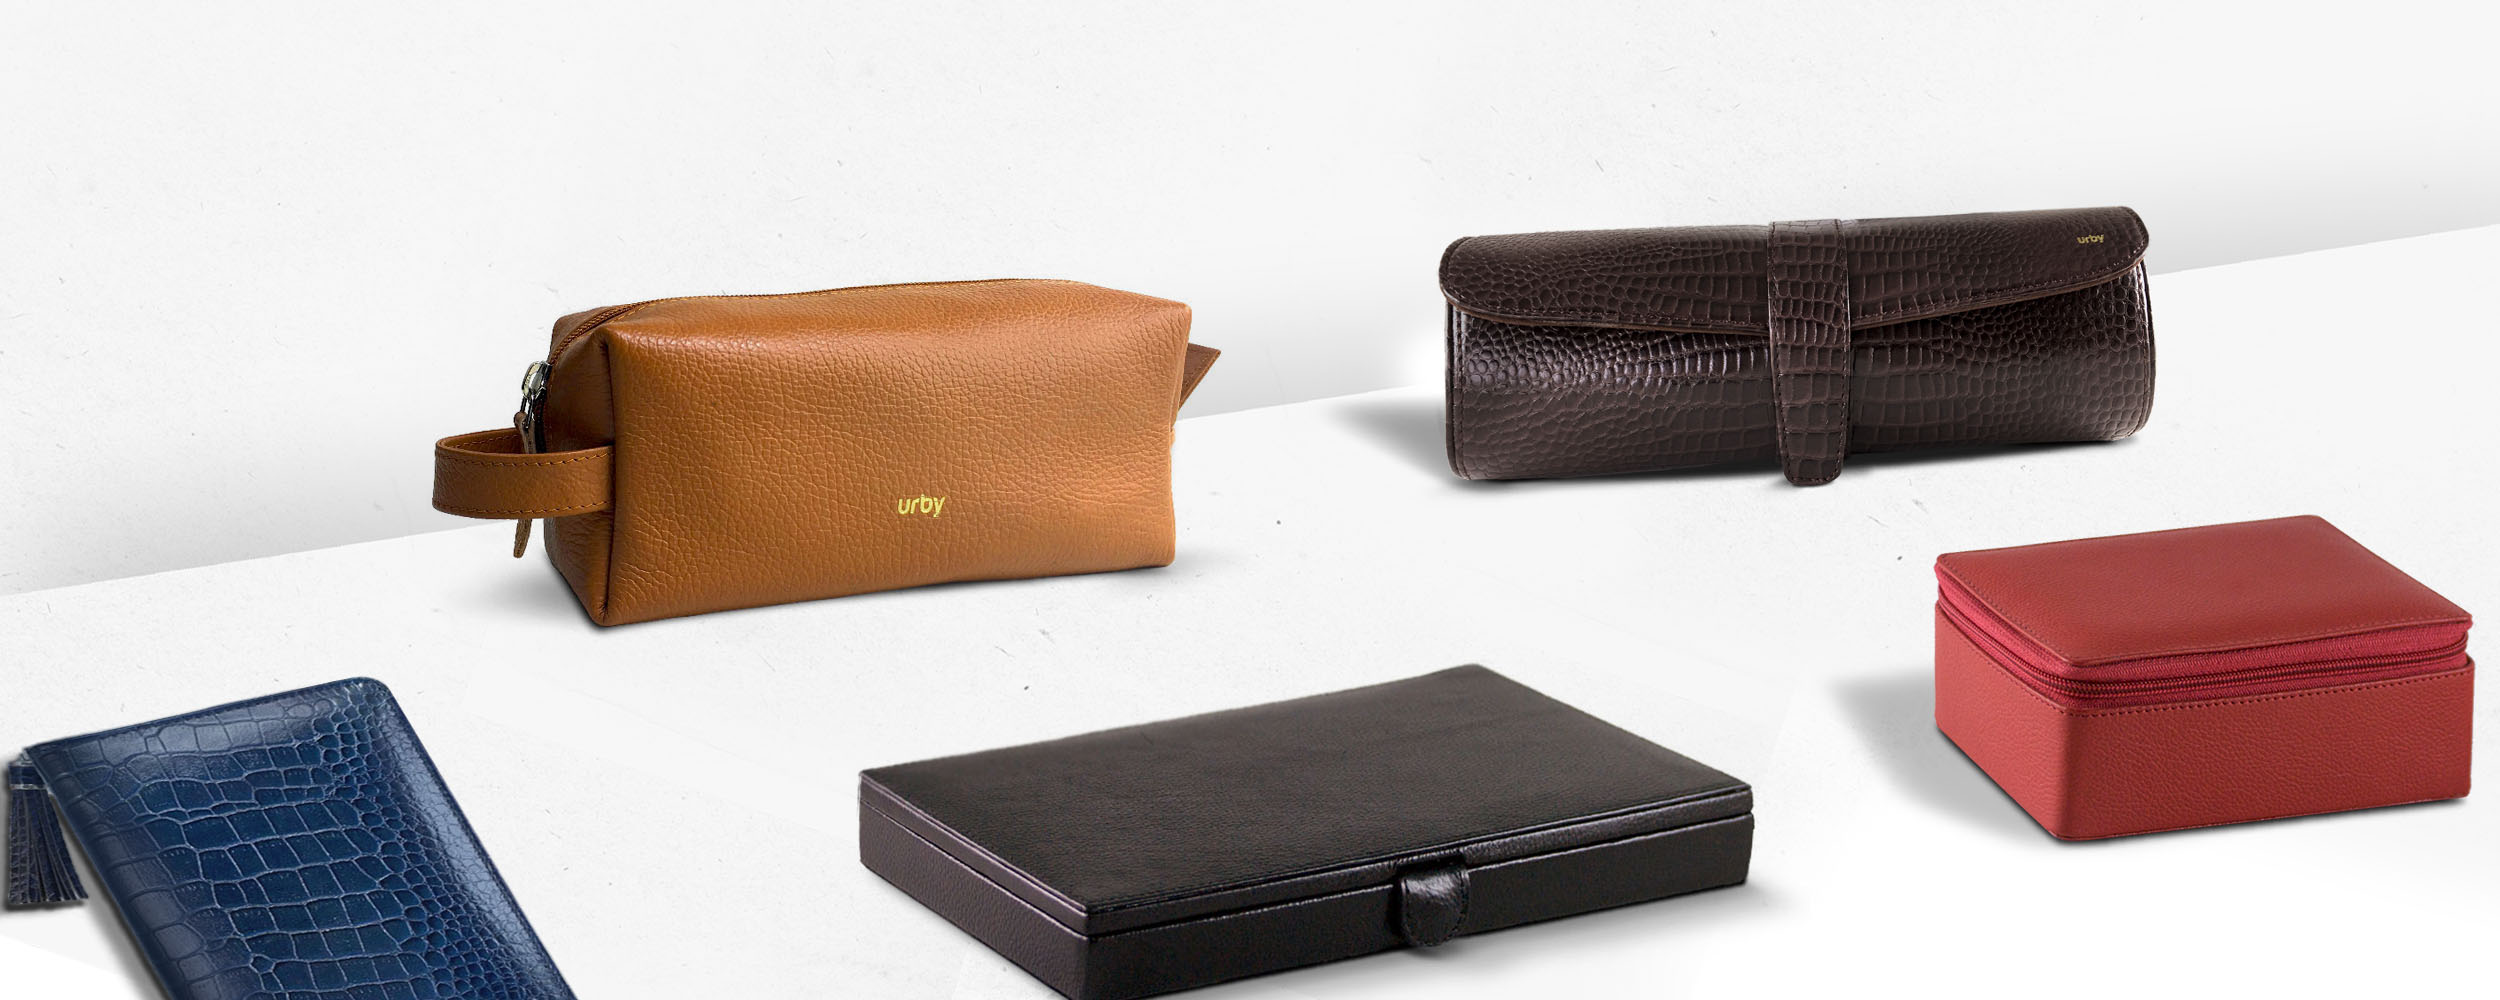 Urby_travel wallet